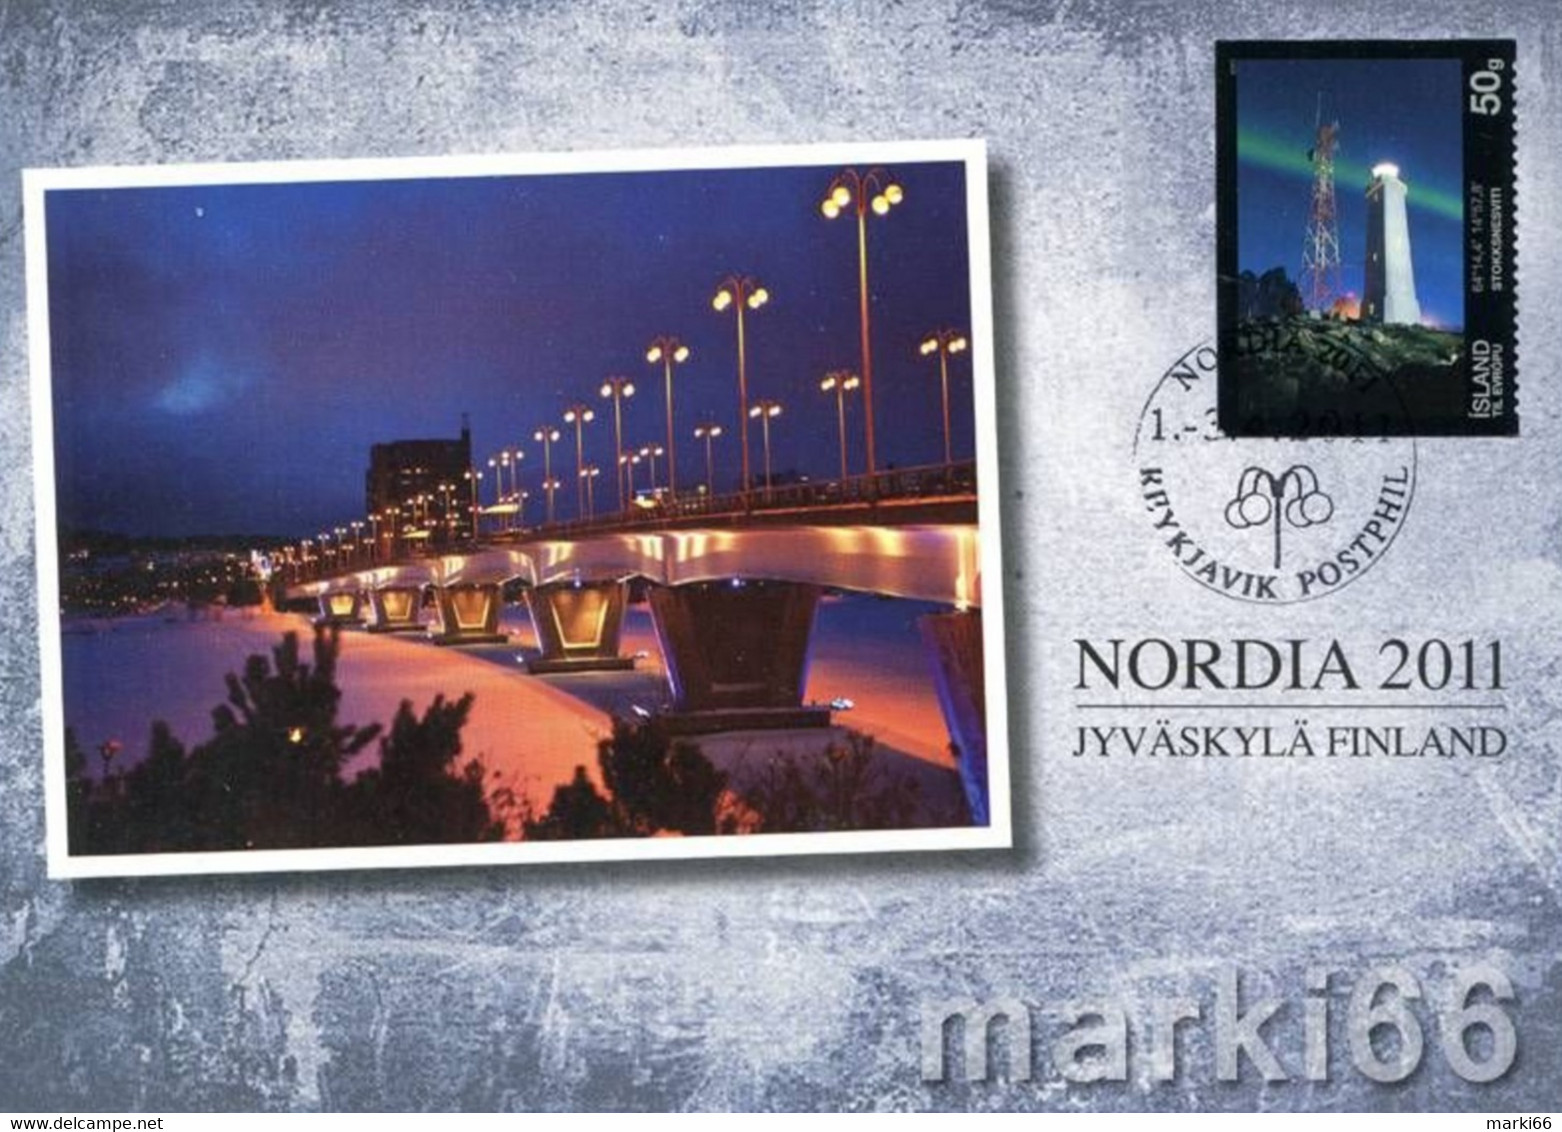 Iceland - 2011 - Exhibition Card - NORDIA 2011, Finland - Official Postcard With Stamp And Special Postmark - Maximumkarten